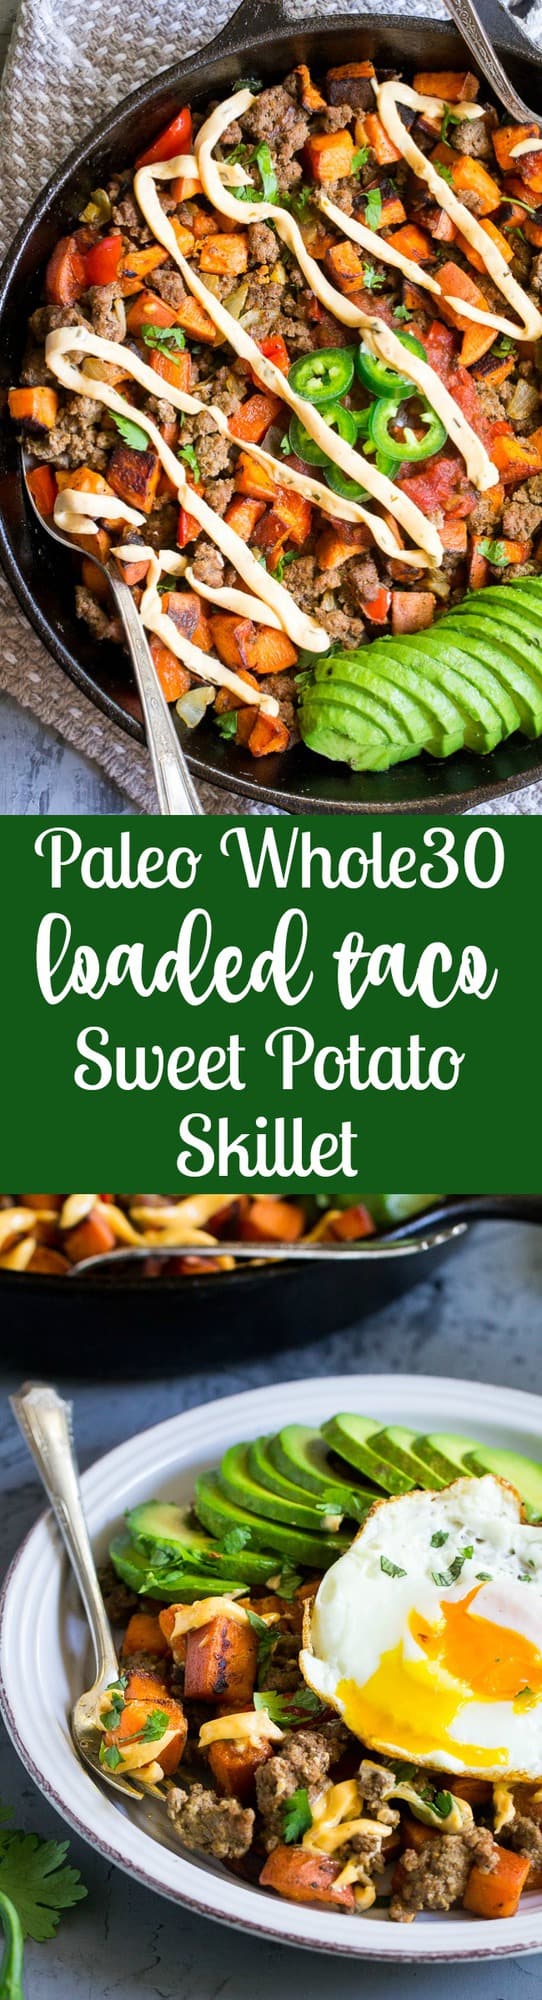 This taco sweet potato skillet is loaded with spicy ground beef, peppers and onions, jalapeños, salsa, avocado and chipotle ranch plus any and all of your favorite toppings!  Try a crispy fried egg and crumbled bacon for brunch heaven!  Paleo and Whole30 compliant.